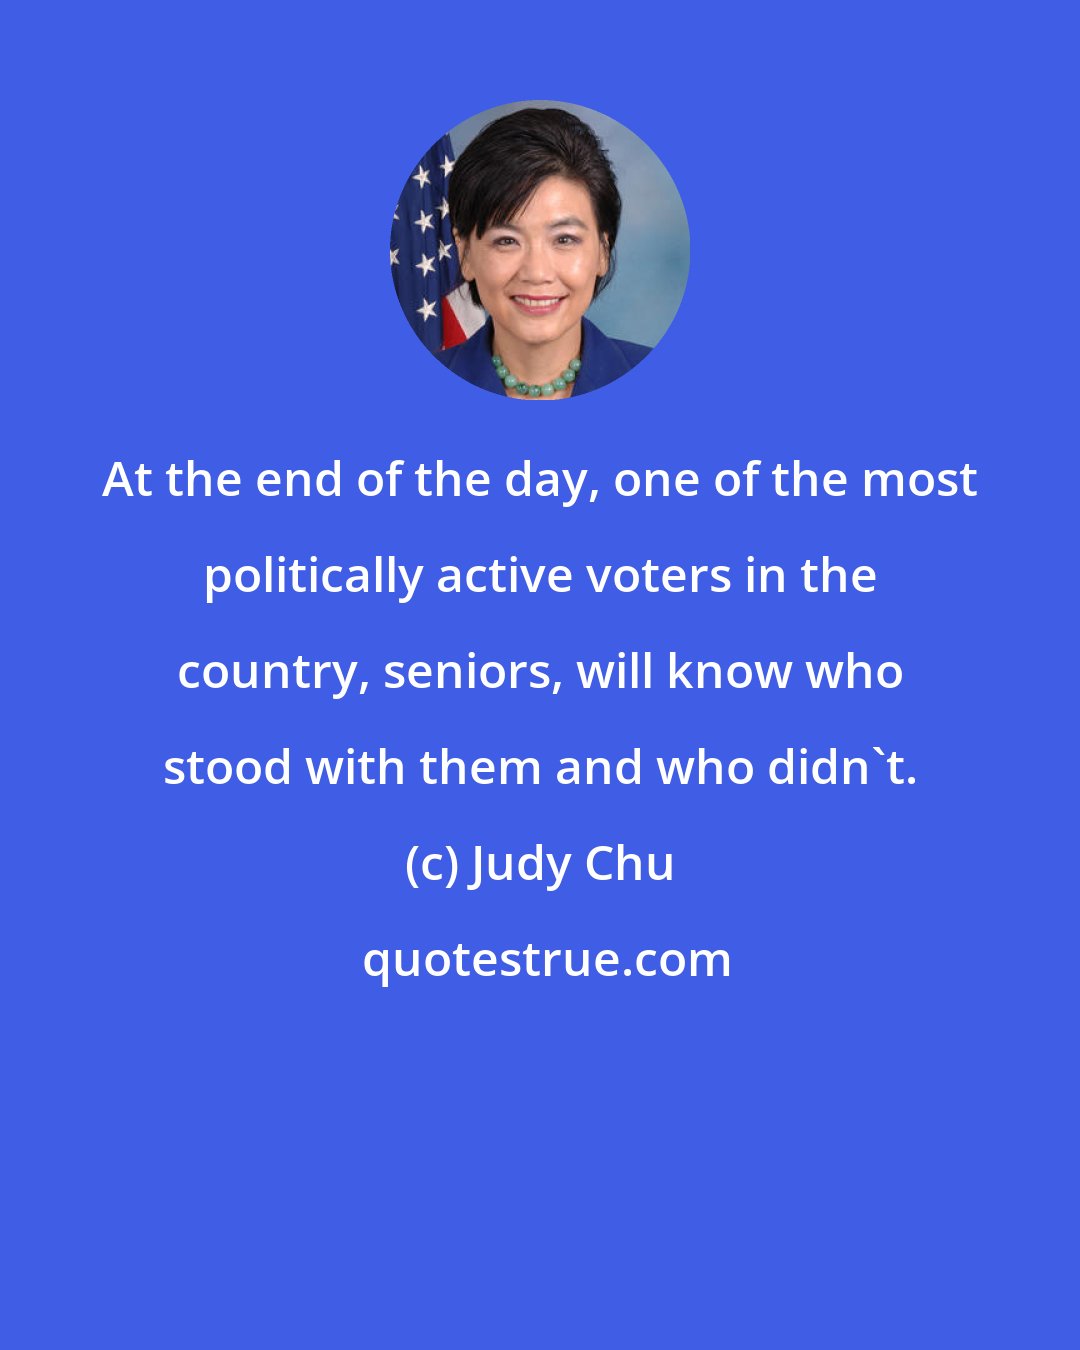 Judy Chu: At the end of the day, one of the most politically active voters in the country, seniors, will know who stood with them and who didn't.